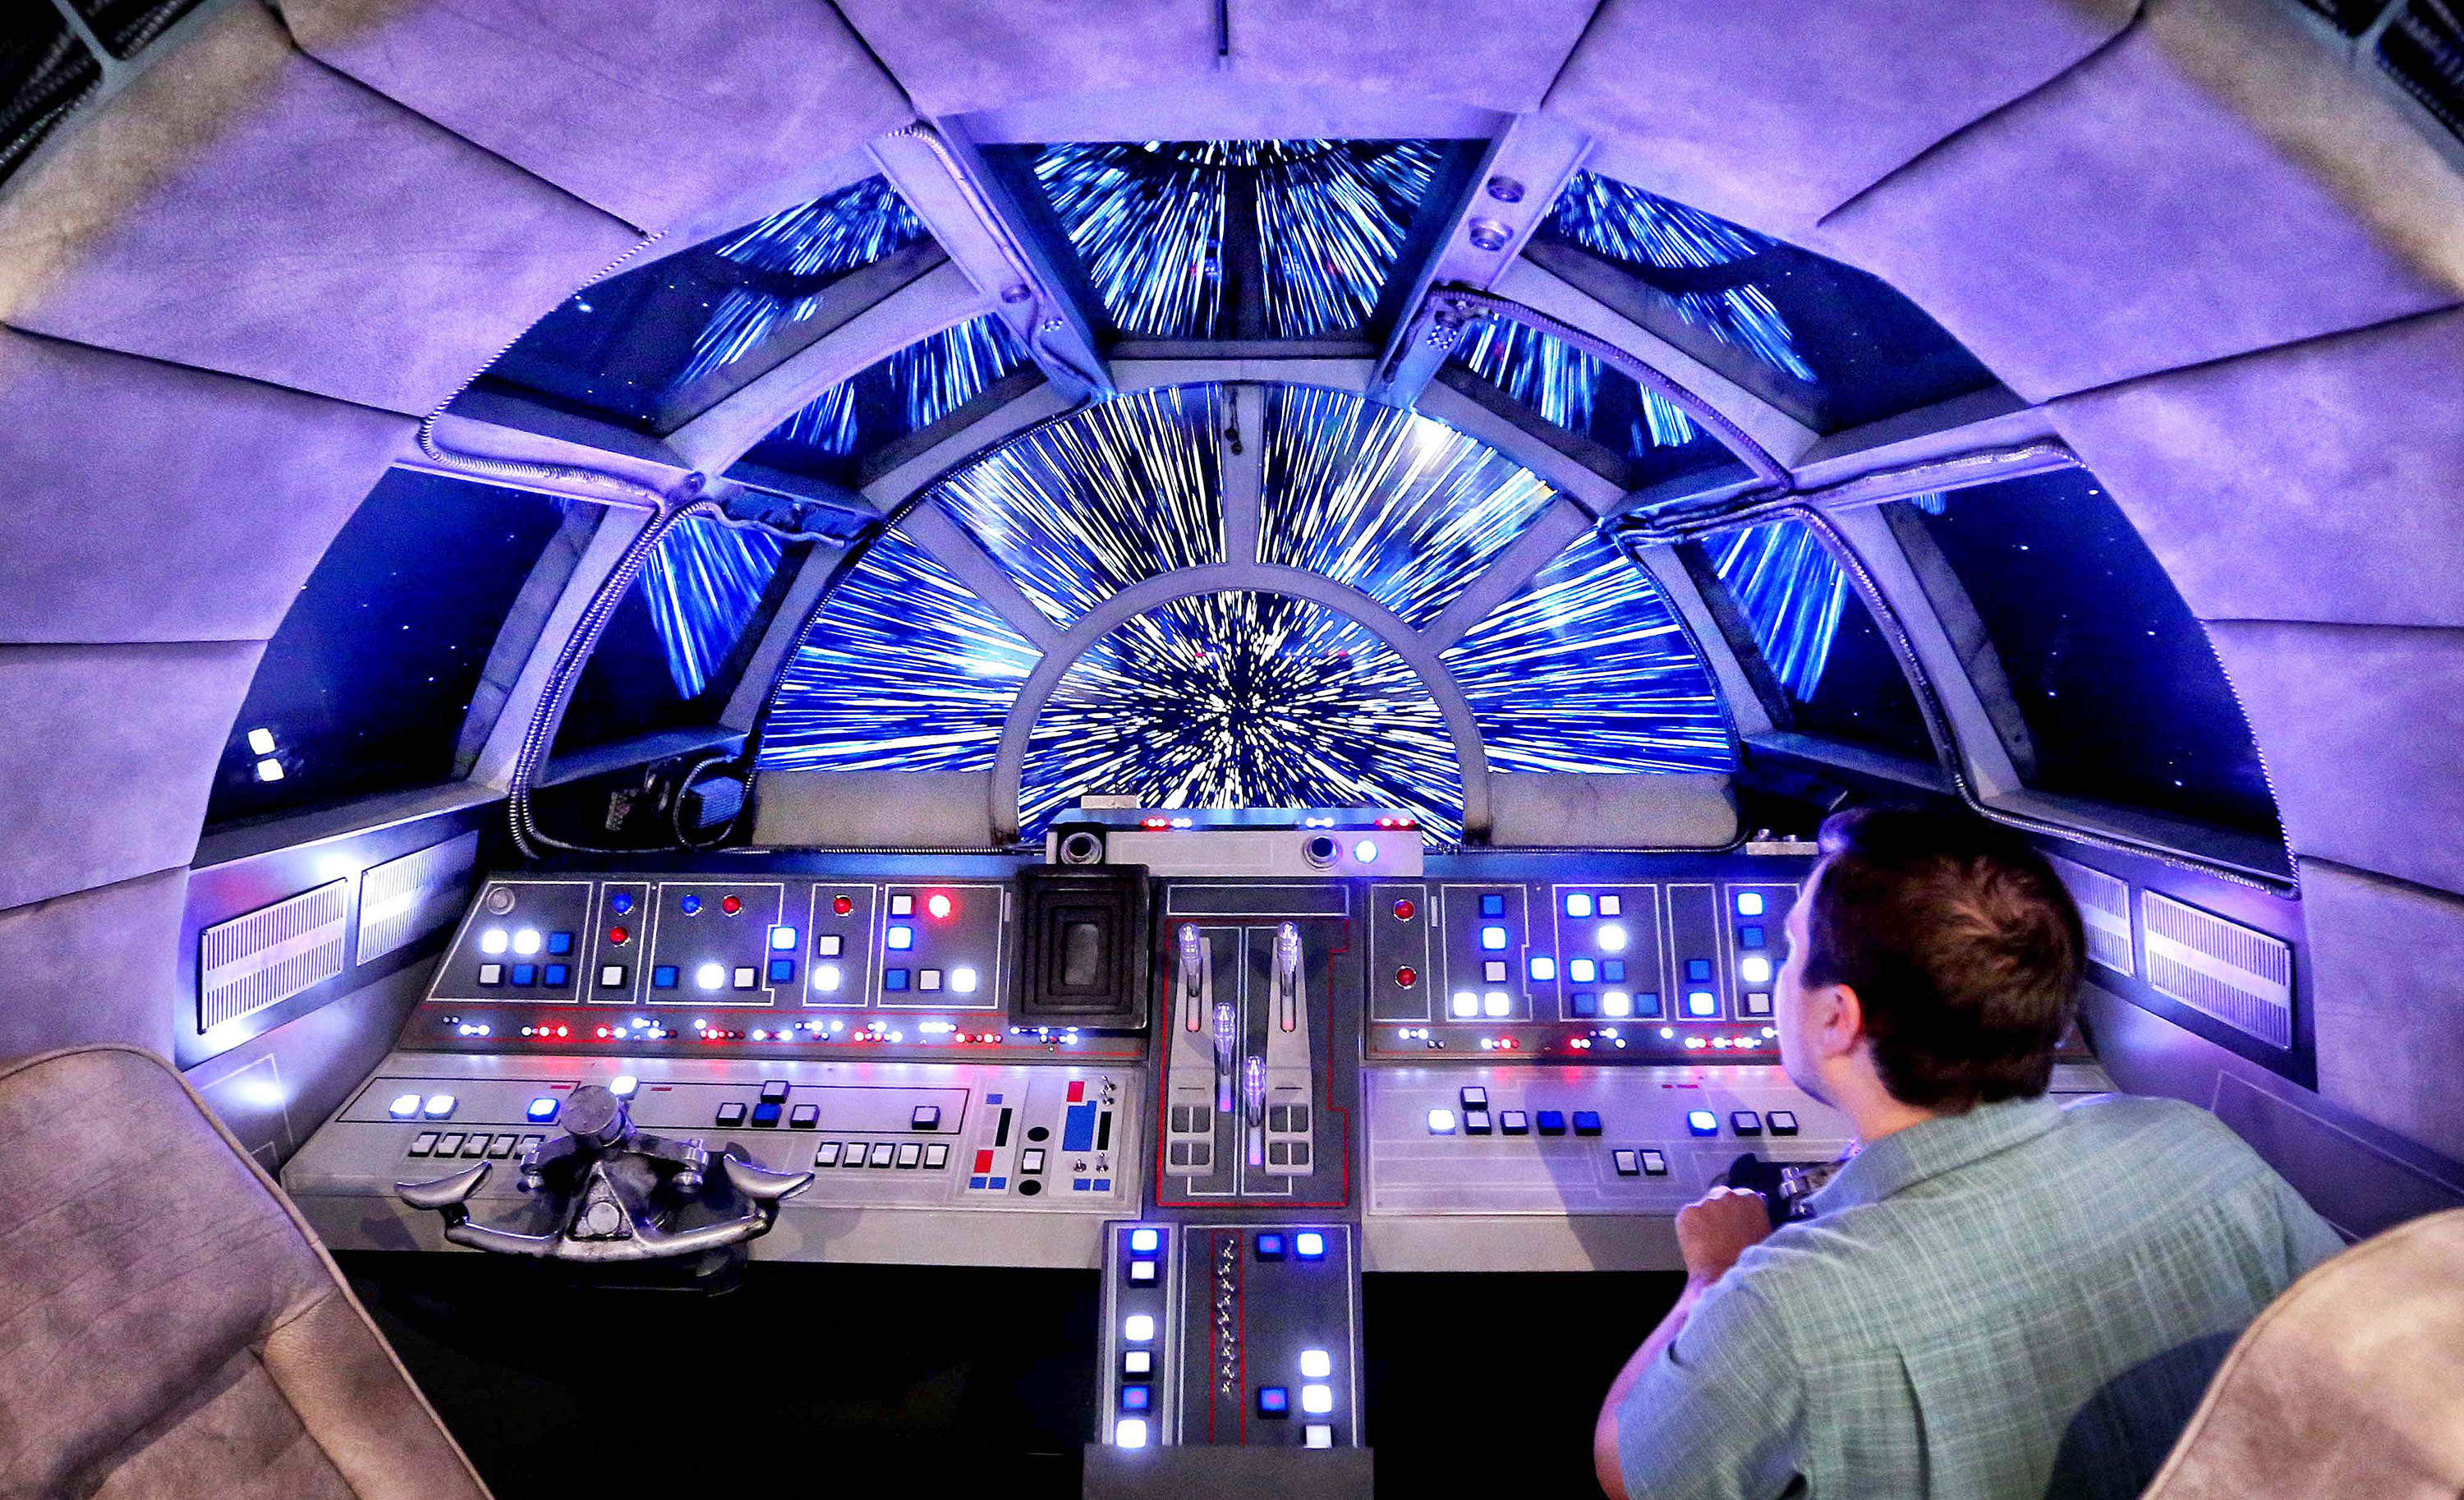 Danny Handke, a creative design executive with Walt Disney Imagineering, demonstrates the hyper reality of the cockpit in the new Star Wars Millennium Falcon play area onboard the Disney Dream, as Disney Cruise Lines unveils the enhancements to the ship on Oct. 30, 2015. (Joe Burbank—Orlando Sentinel/TNS/Getty Images)